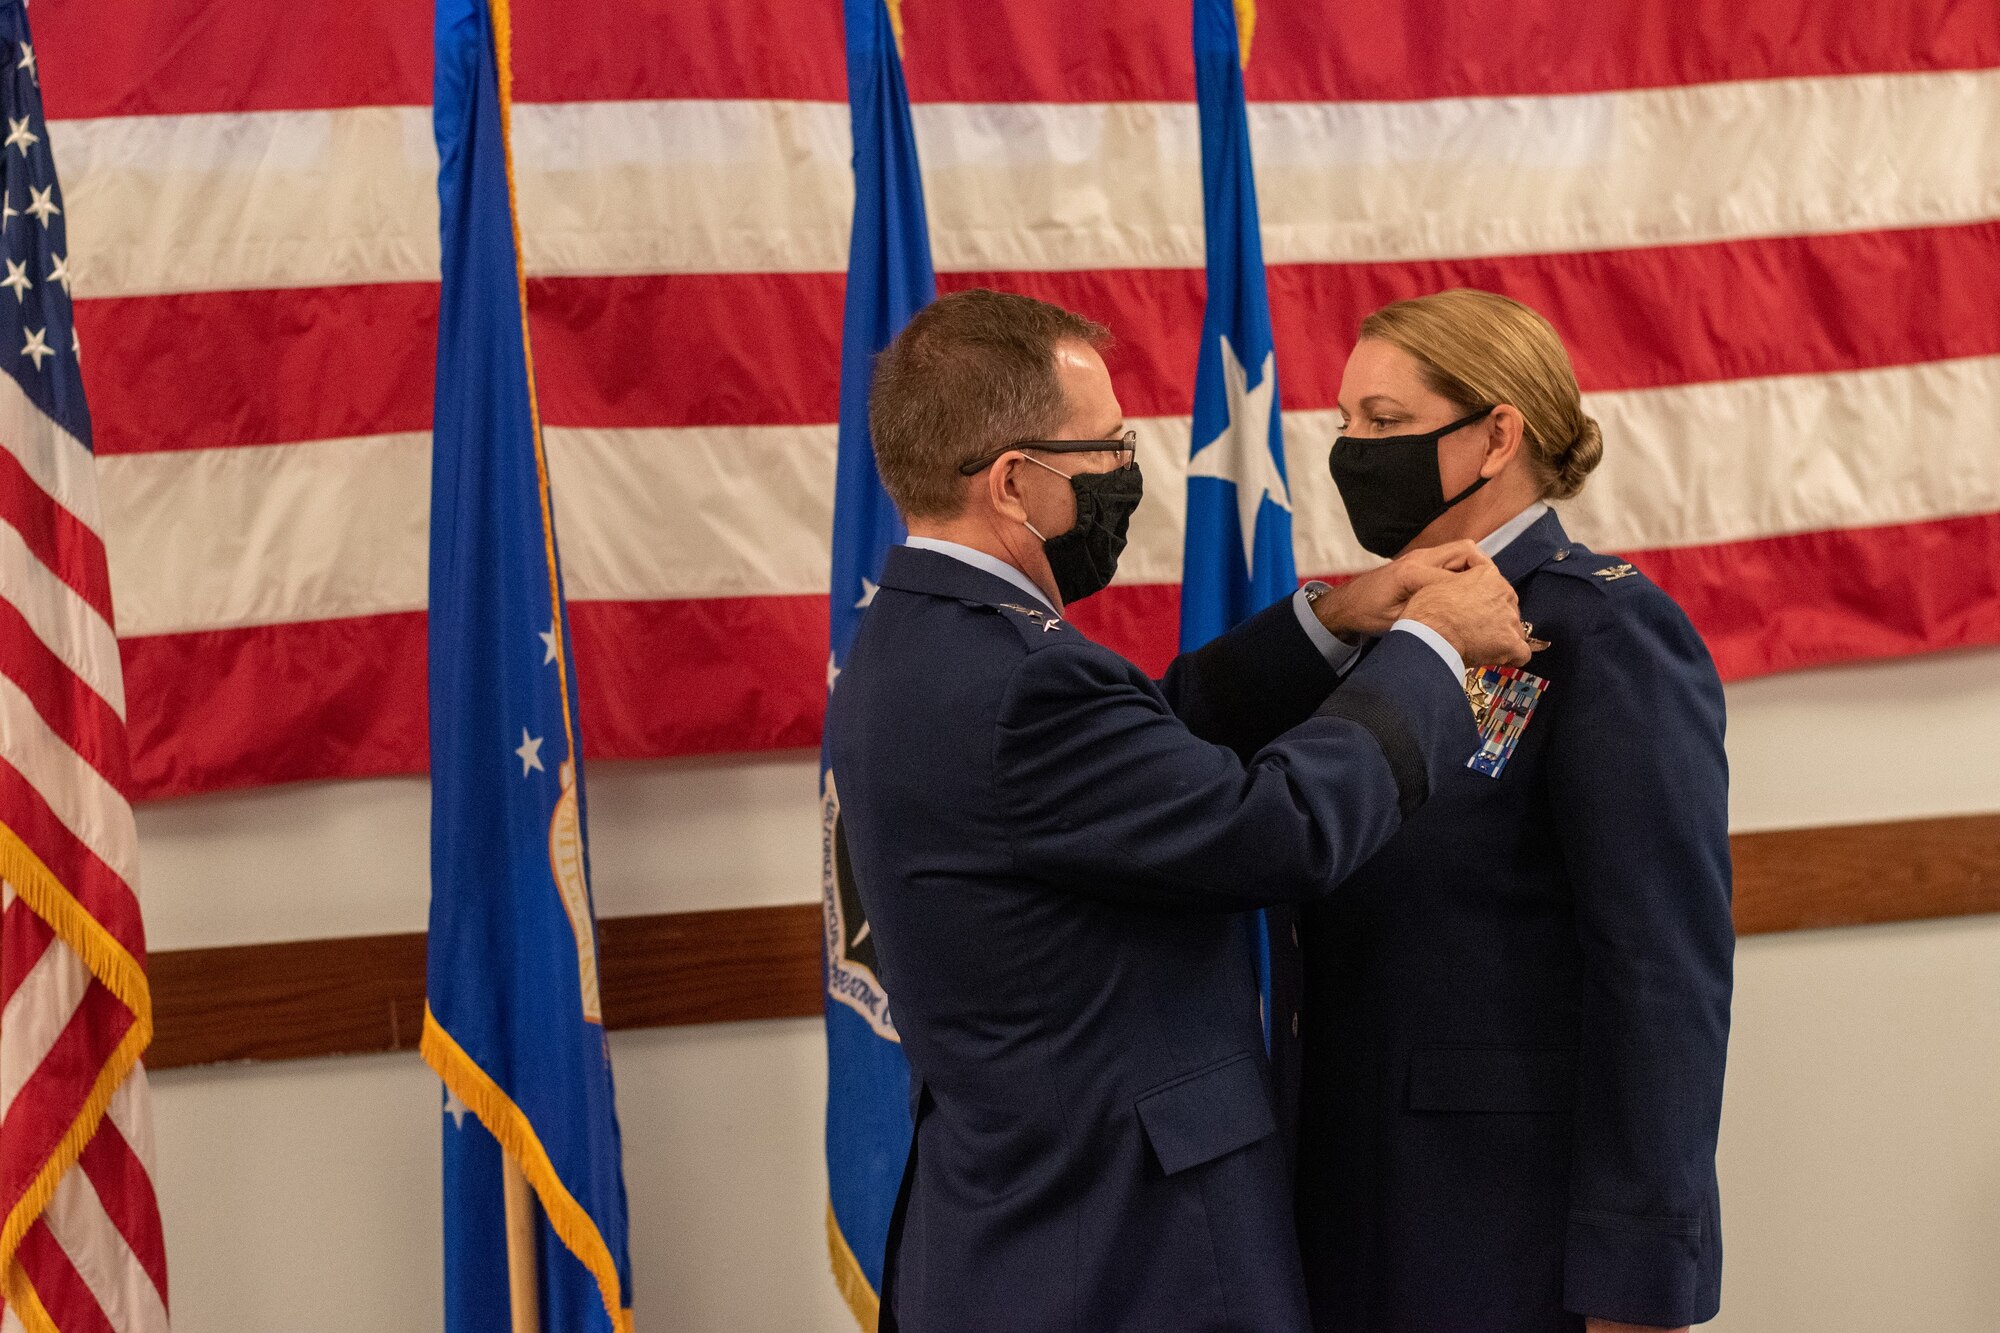 U.S. Air Force Lt. Gen. Jim Slife, commander of Air Force Special Operations Command, pins the Legion of Merit on U.S. Air Force Col. Shelley Woodworth during her retirement ceremony on Nov. 23, 2020. Woodworth was the first female AFSOC pilot and retired with 3,500 flying hours.